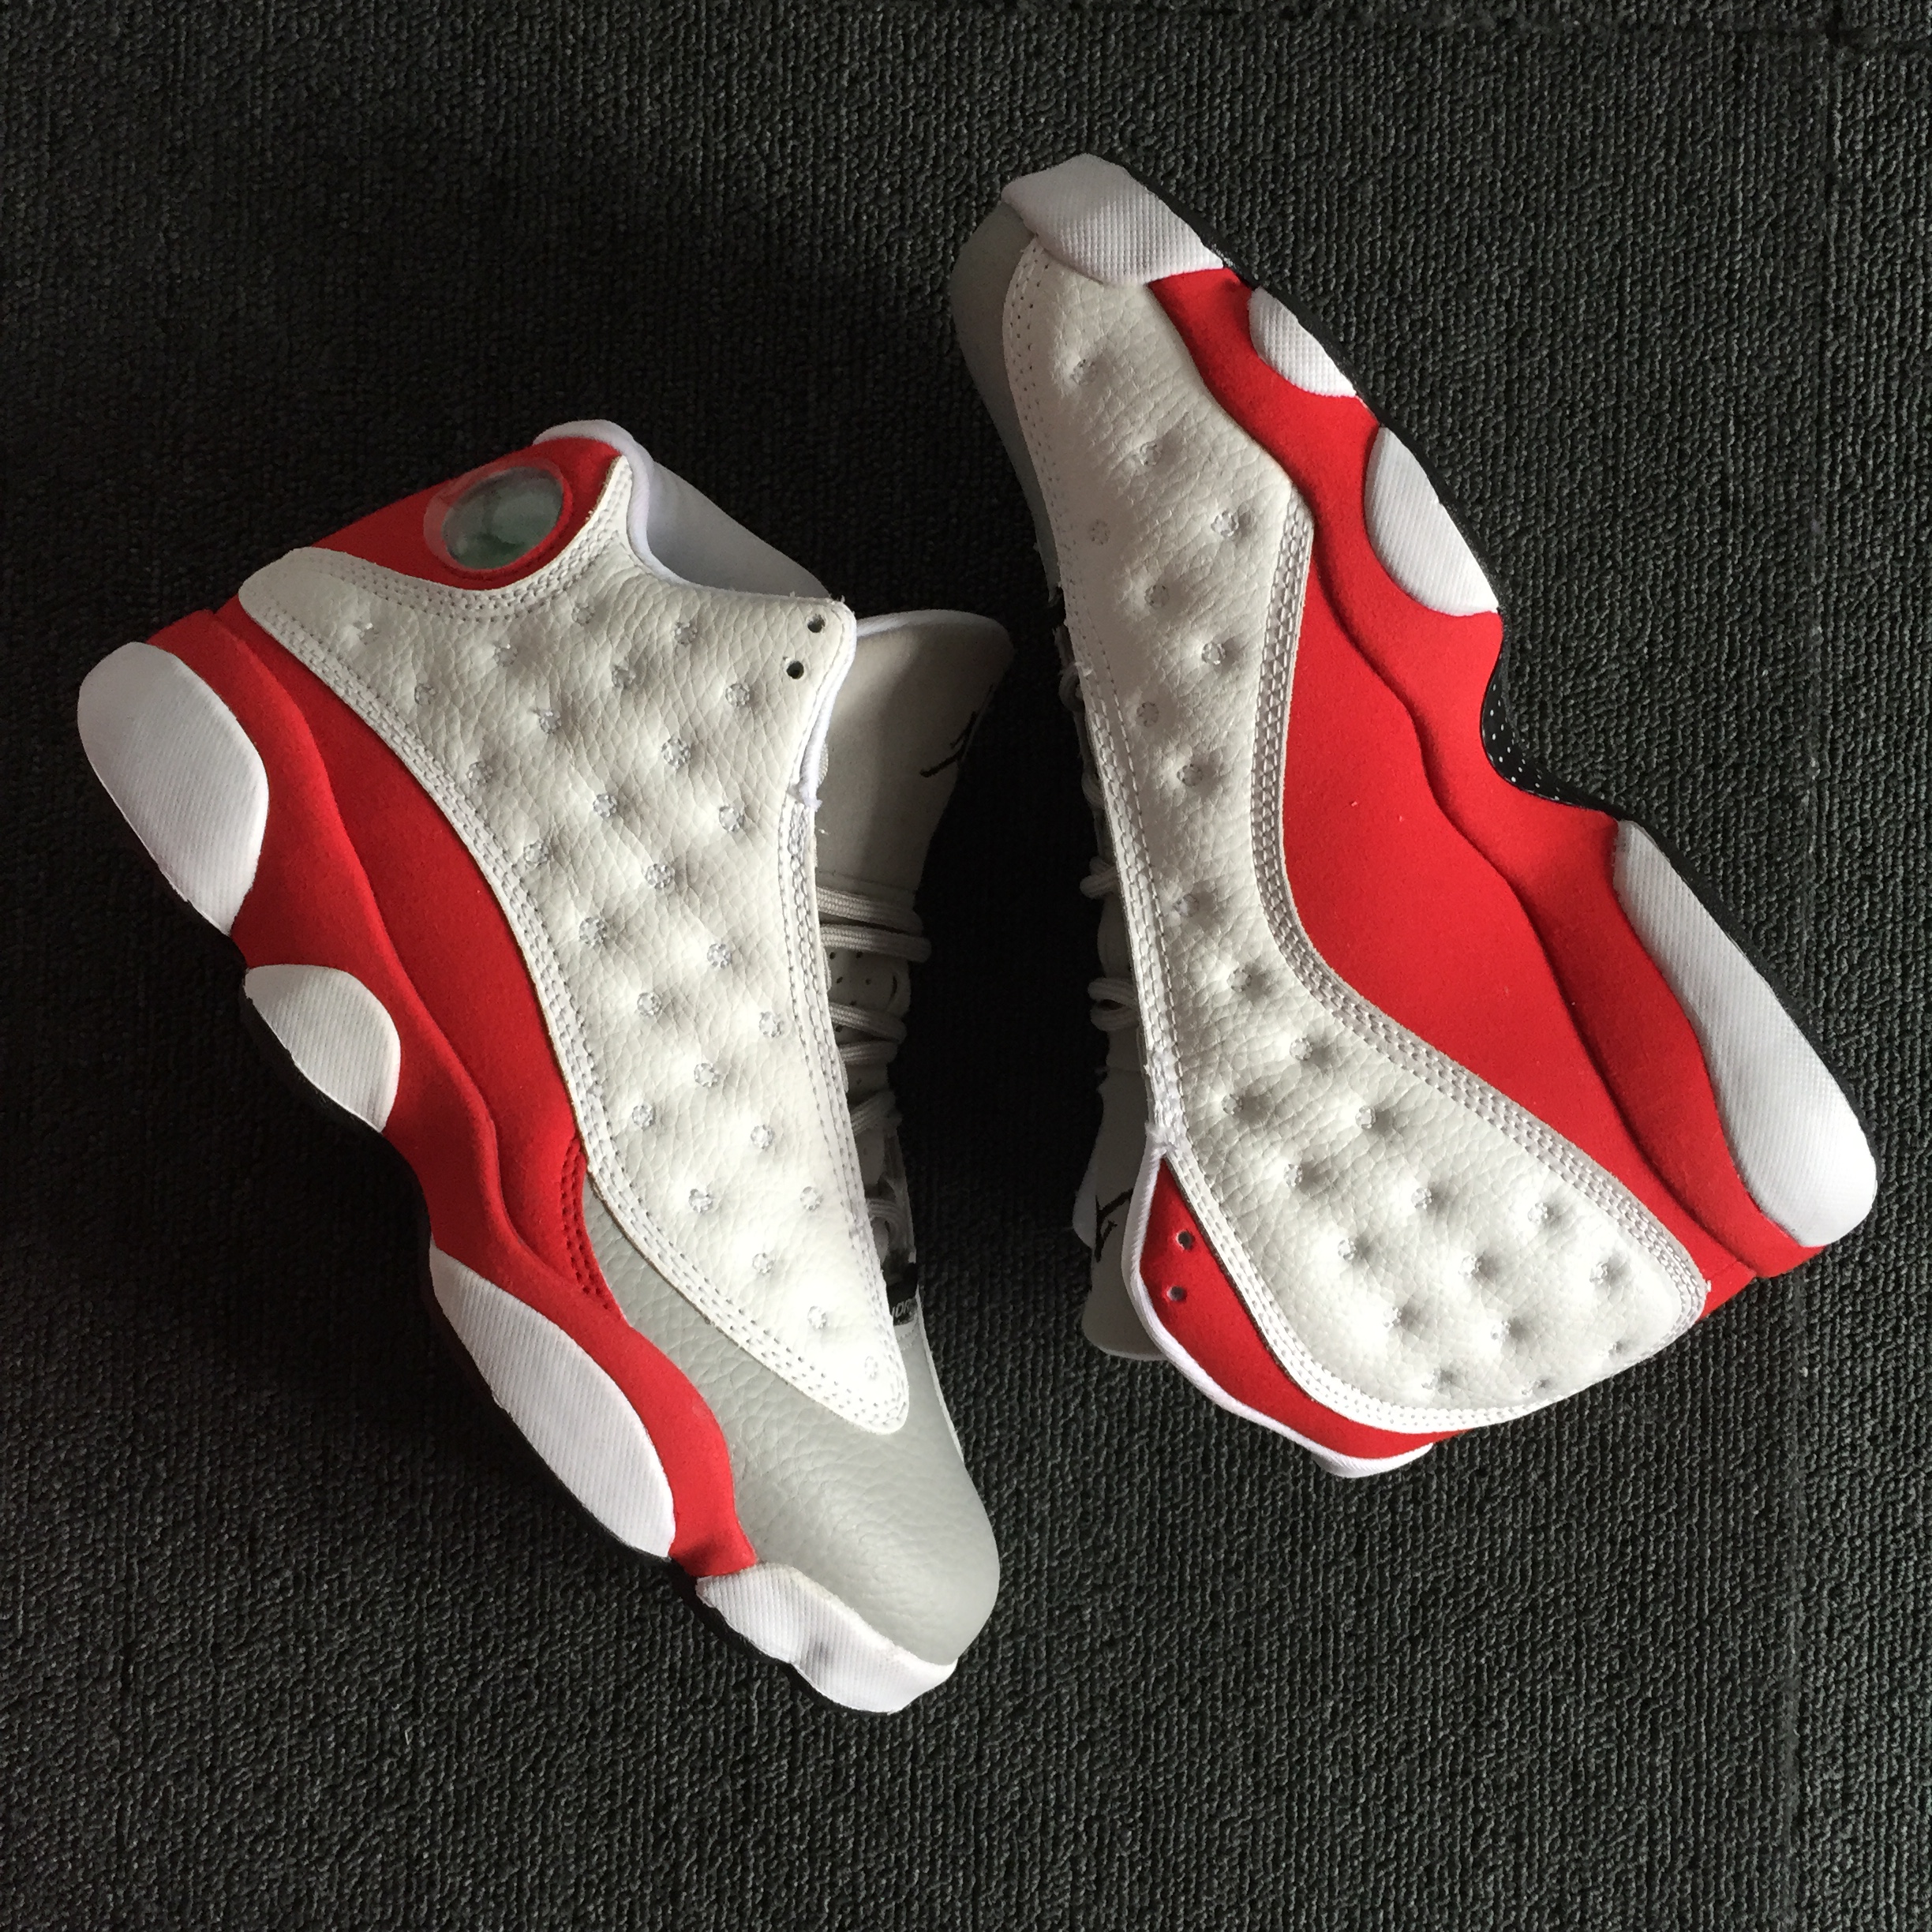 New Air Jordan 13 Kidd White Grey Red Shoes - Click Image to Close